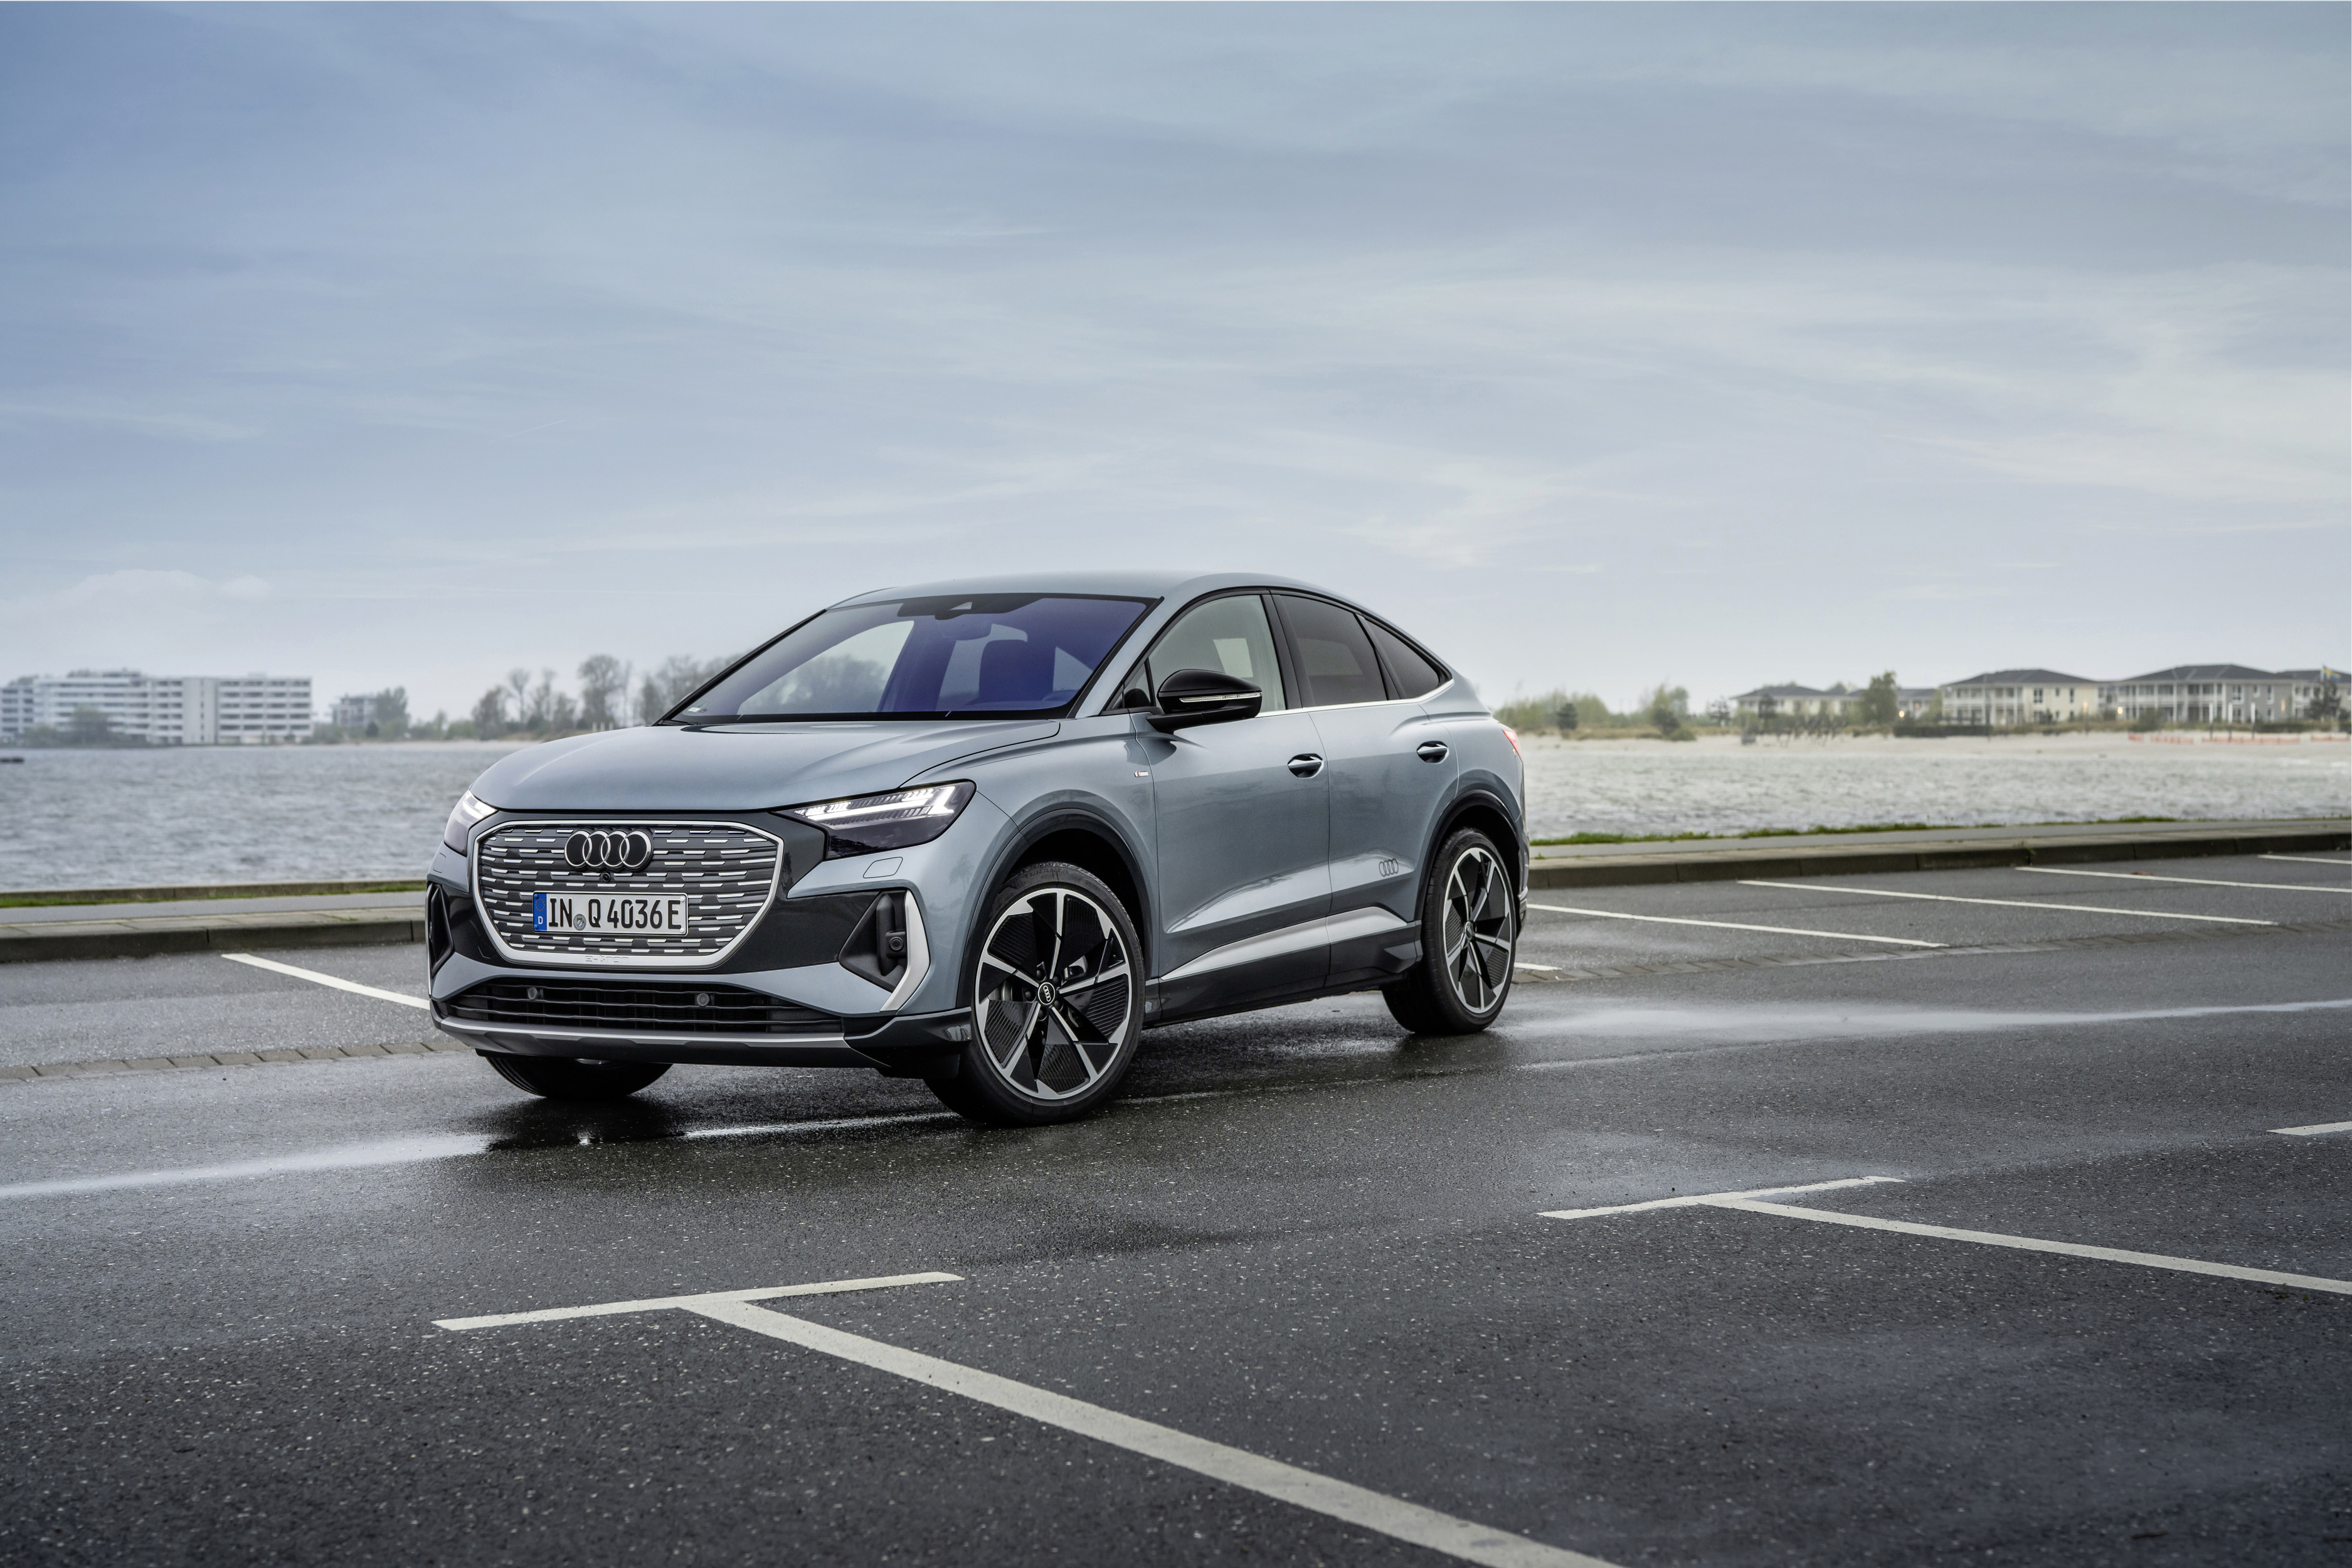 Range and power boost for updated Audi Q4 e-tron